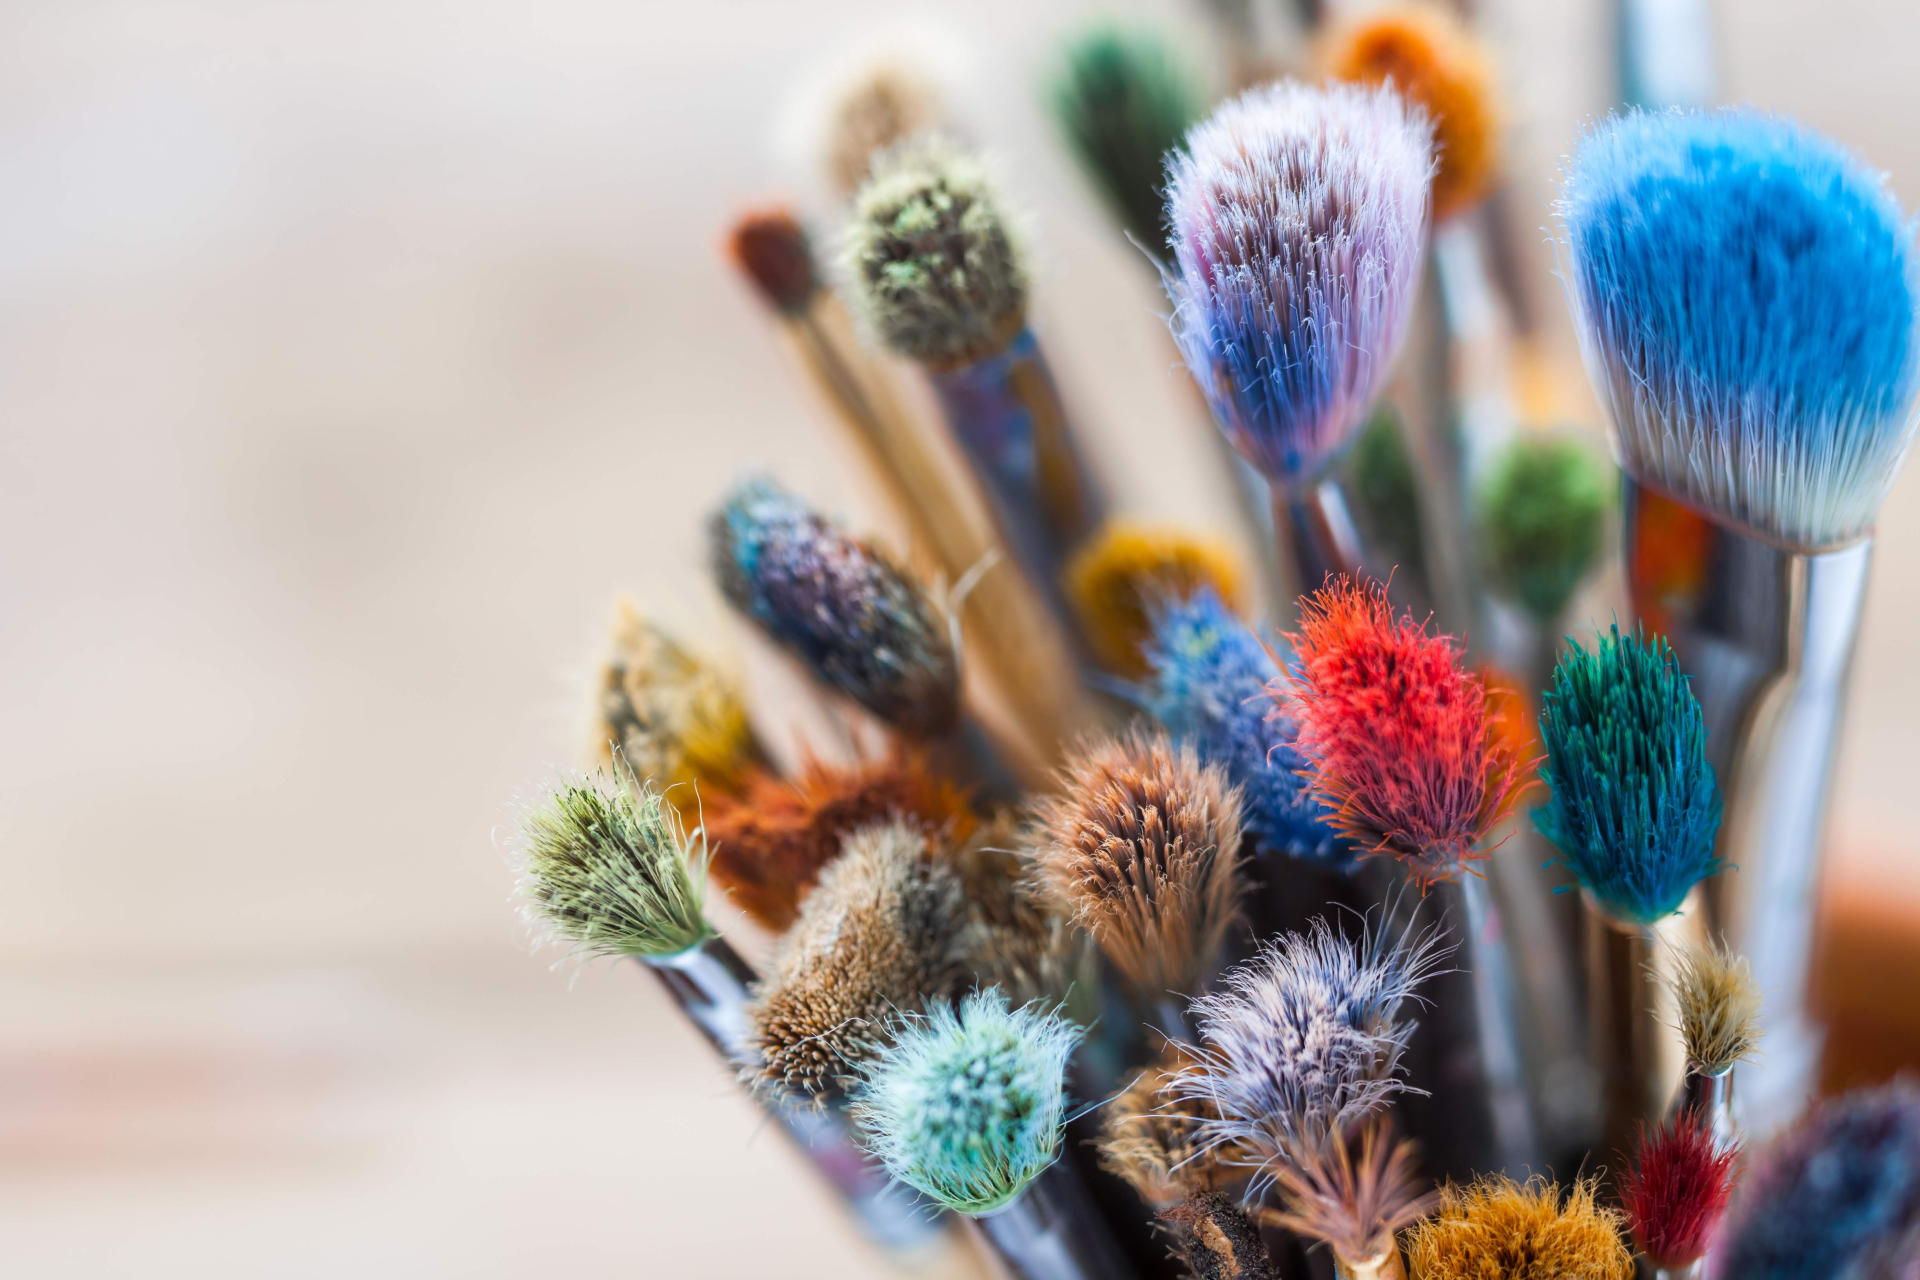 paintbrushes with different colors